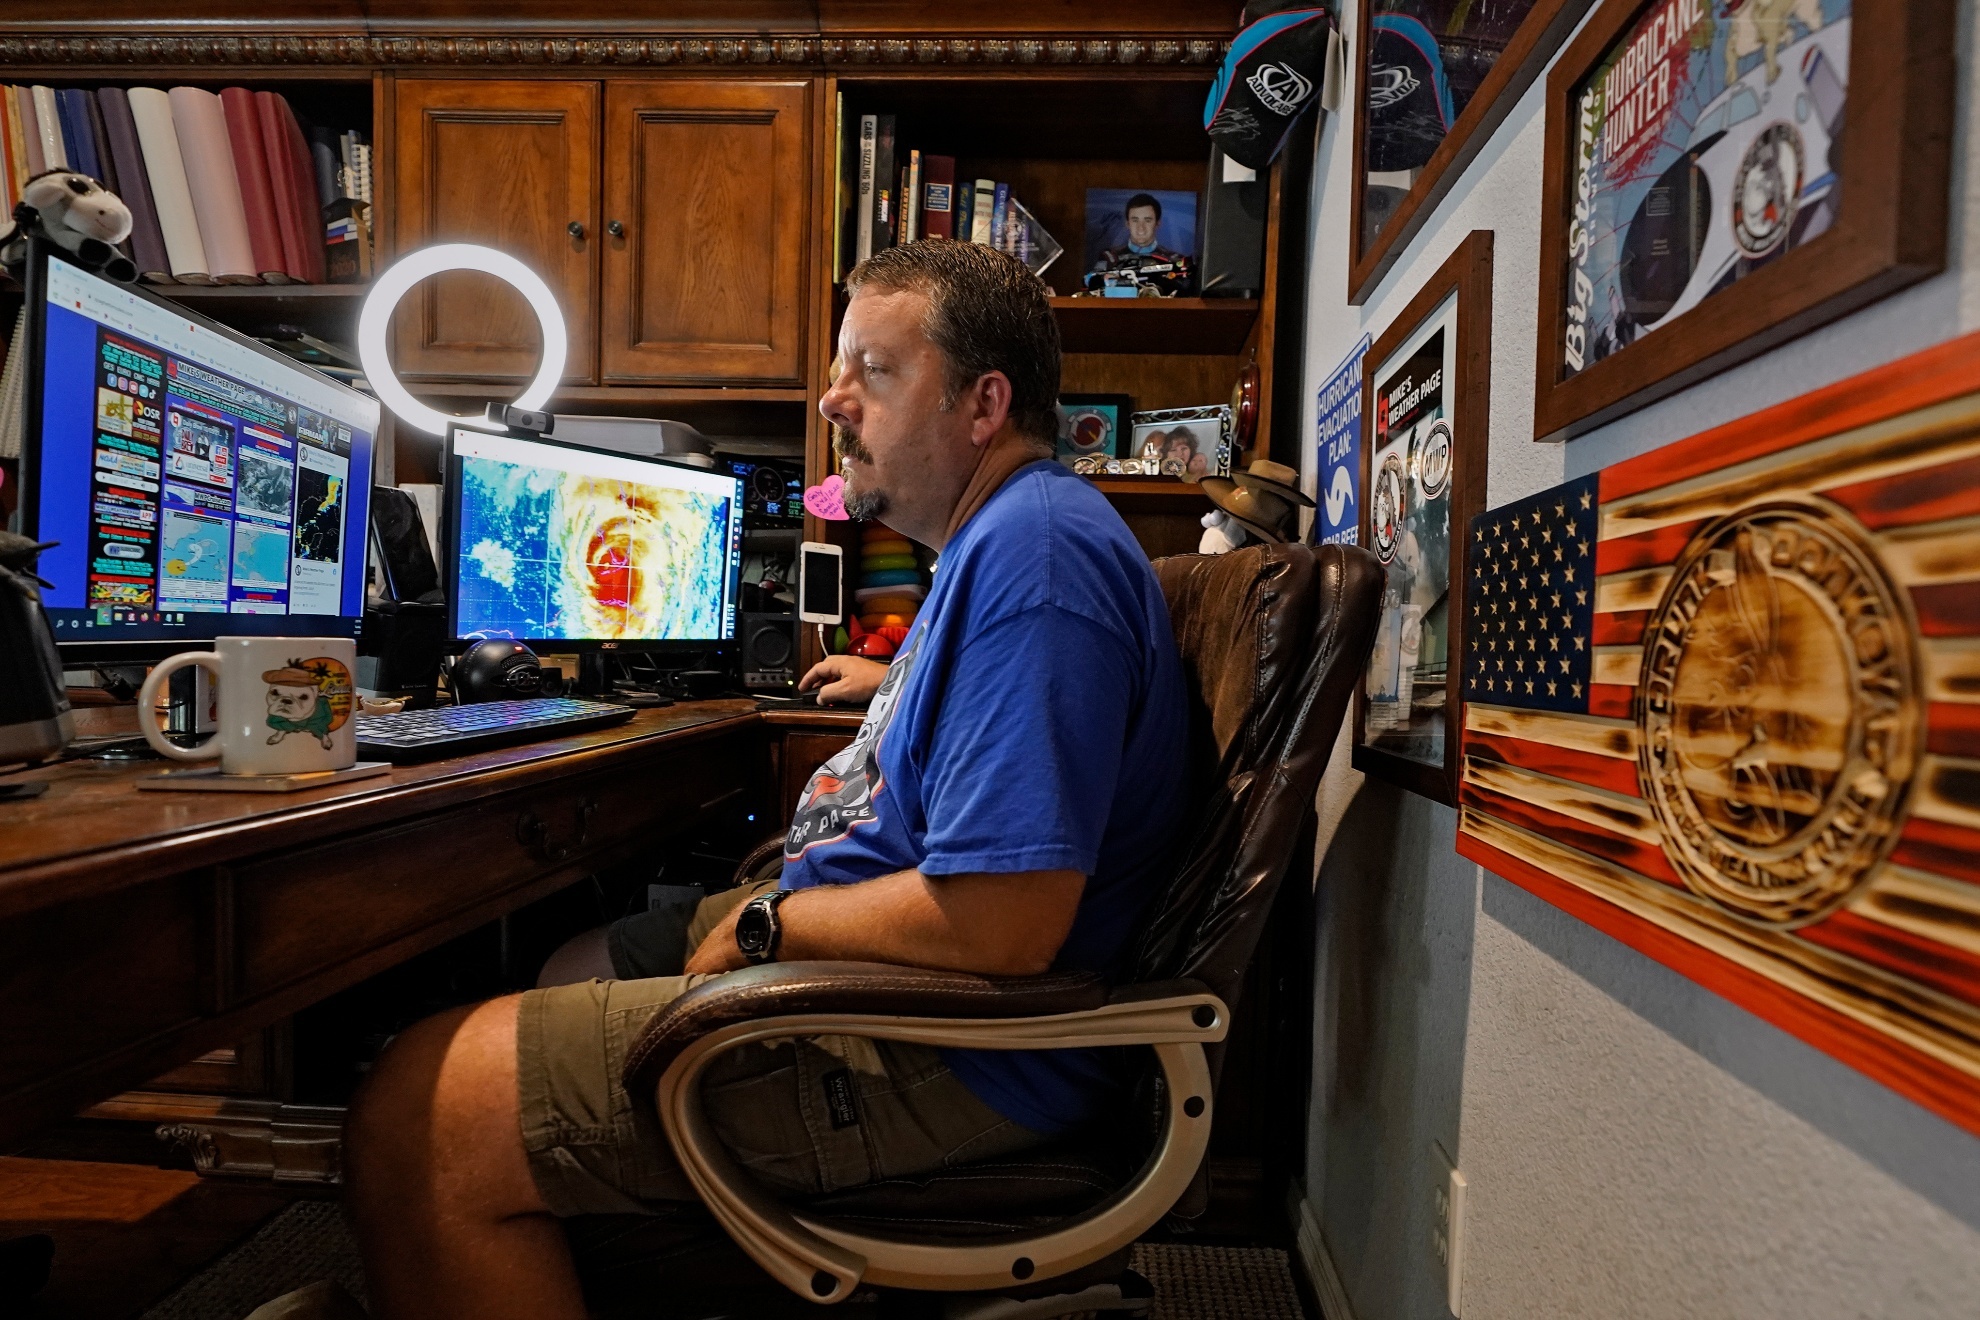 An American during a day's work at his home office